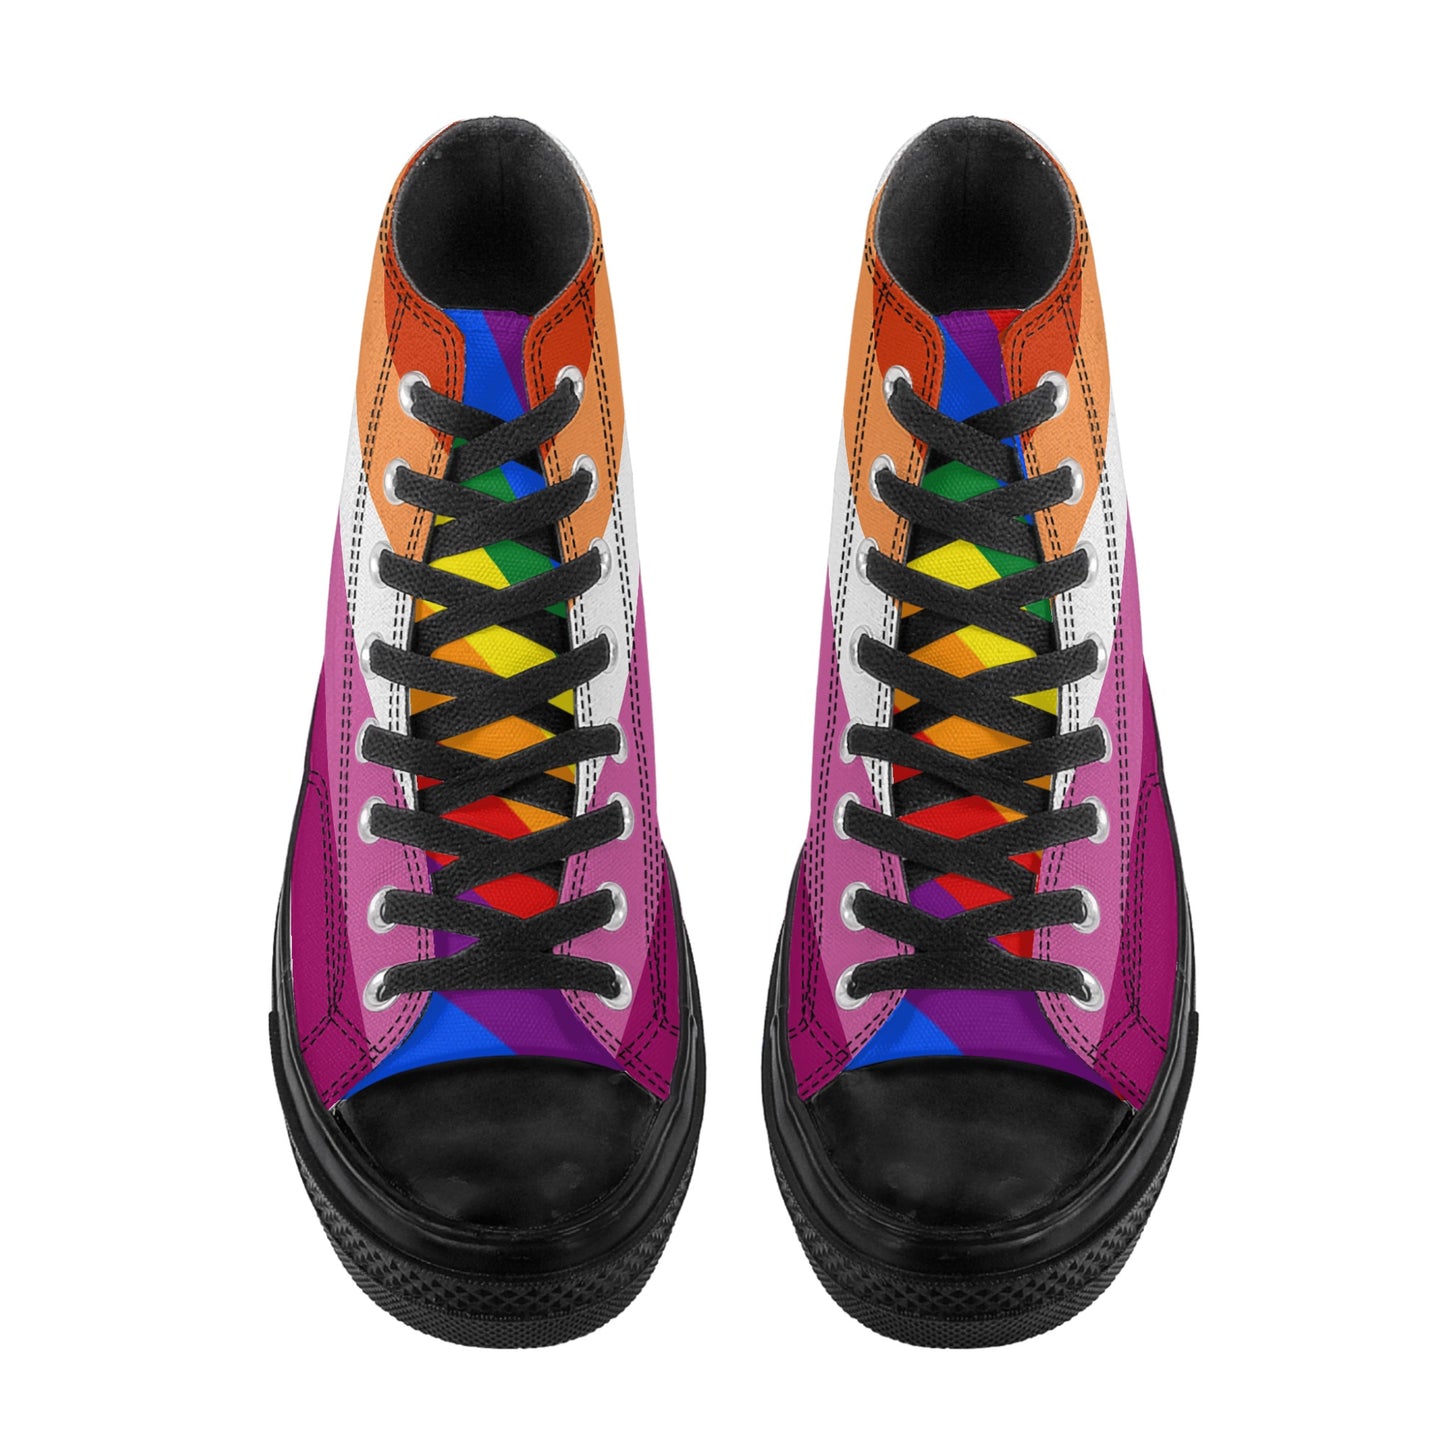 Lesbian Pride Collection - Womens Classic Black High Top Canvas Shoes for the LGBTQIA+ community